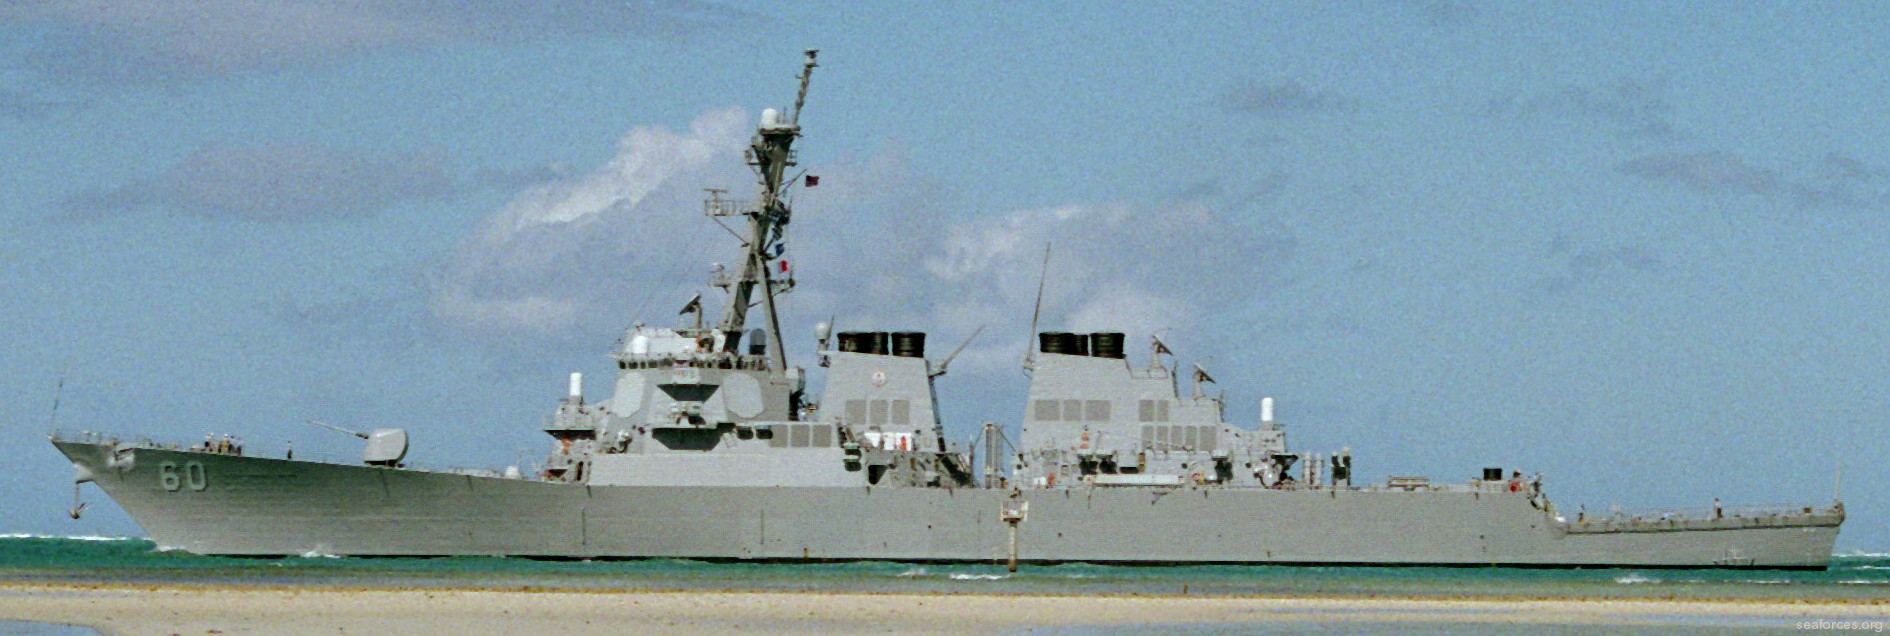 ddg-60 uss paul hamilton guided missile destroyer us navy 65